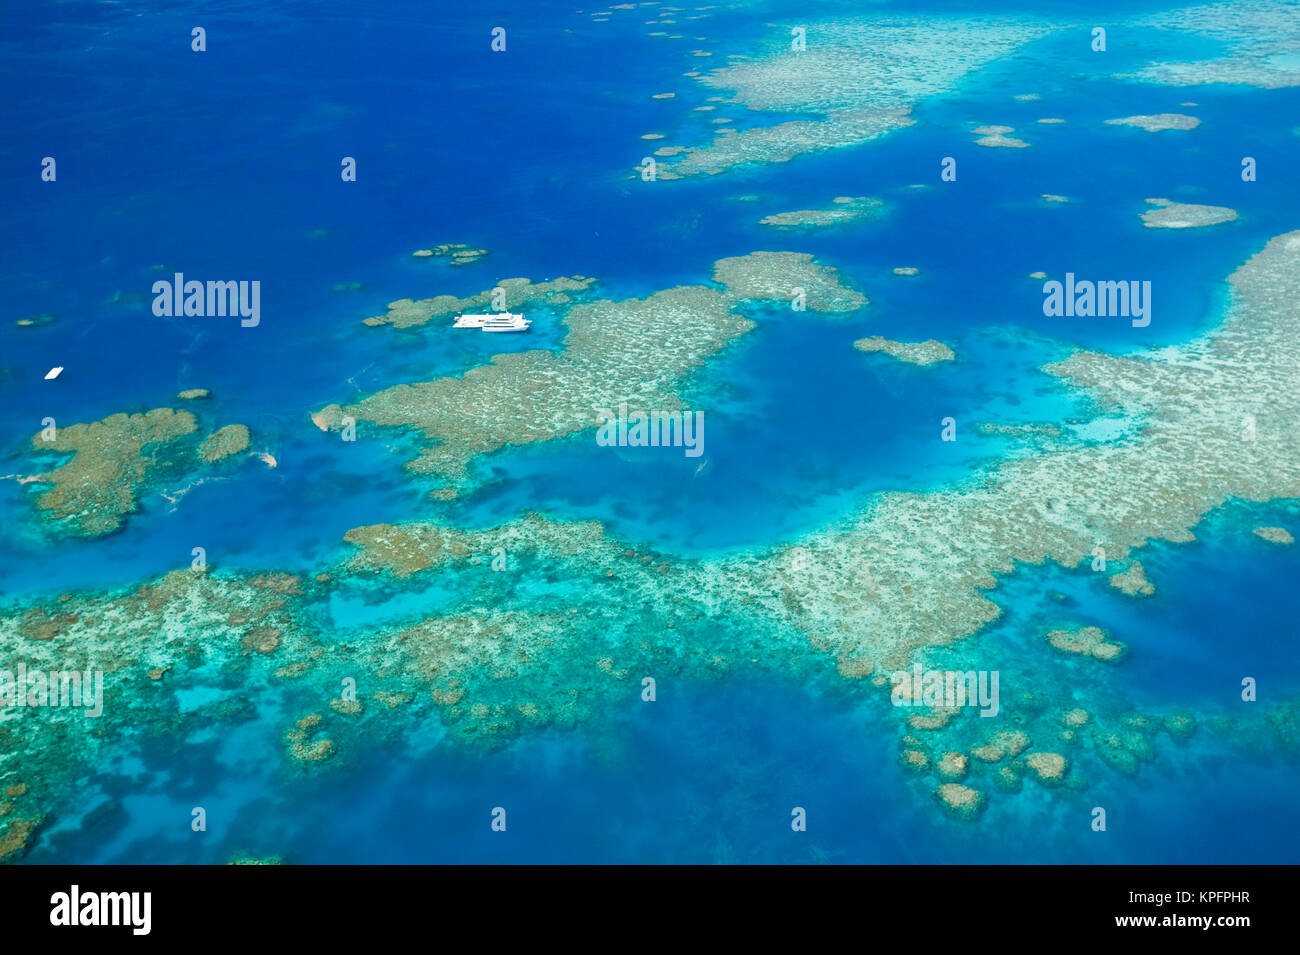 Australia, Queensland, North Coast, Cairns Area. The Great Barrier Reef- Aerial View of Moore Reef. Stock Photo